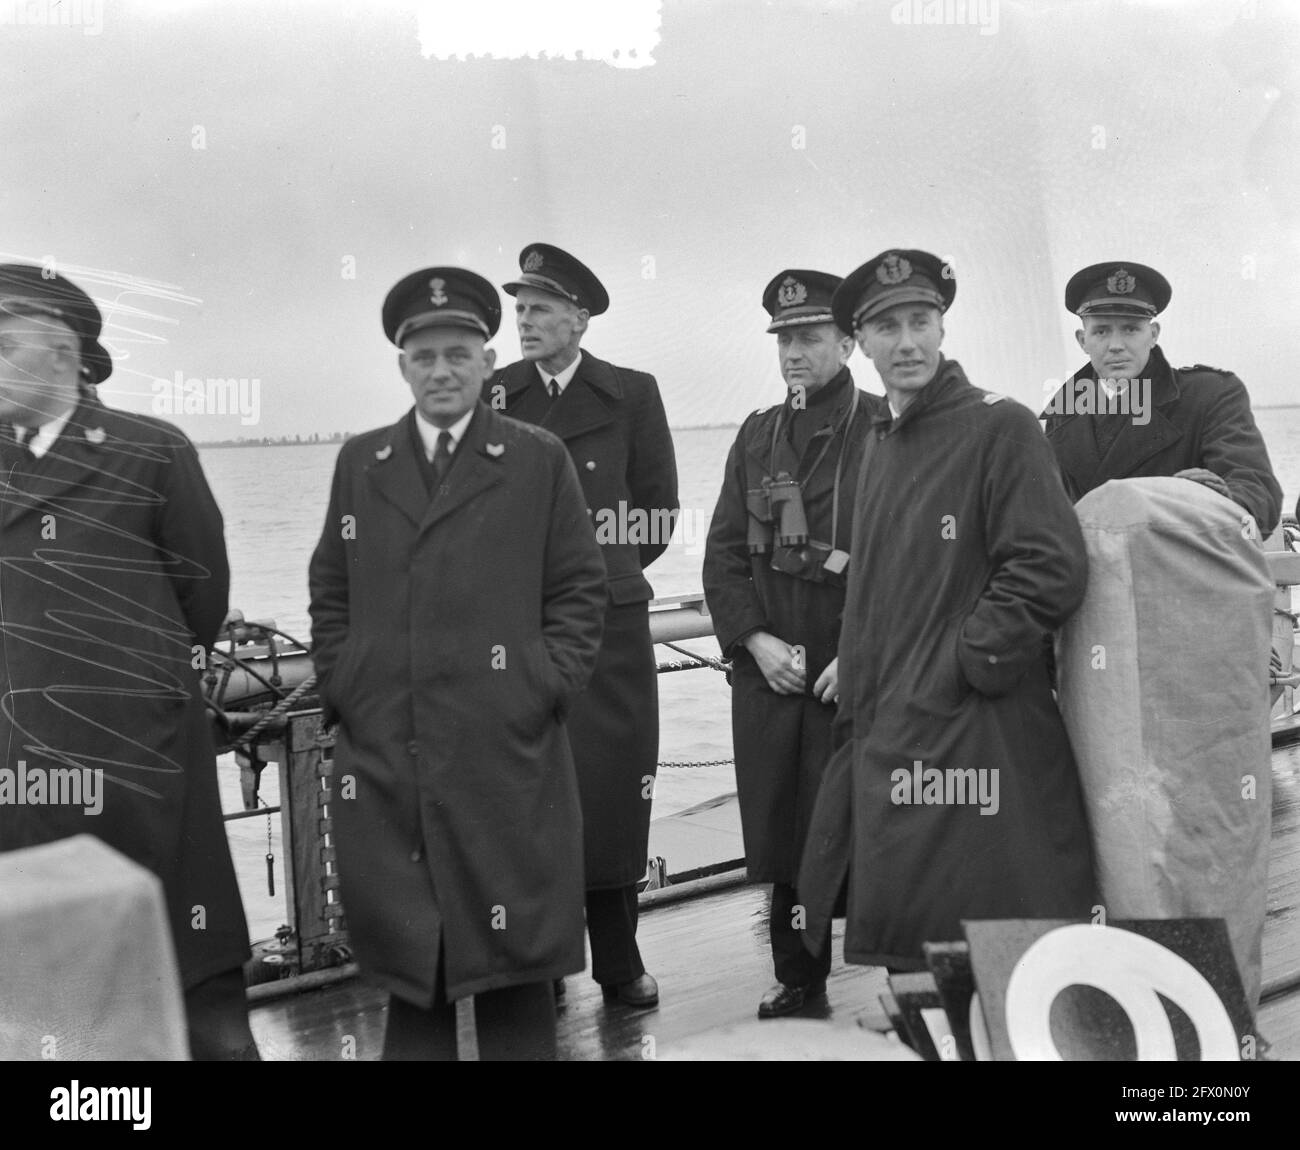 Sailing Competition of the Royal Navy Colonel Bax, 24 October 1952, MARINE, sailing competitions, The Netherlands, 20th century press agency photo, news to remember, documentary, historic photography 1945-1990, visual stories, human history of the Twentieth Century, capturing moments in time Stock Photo